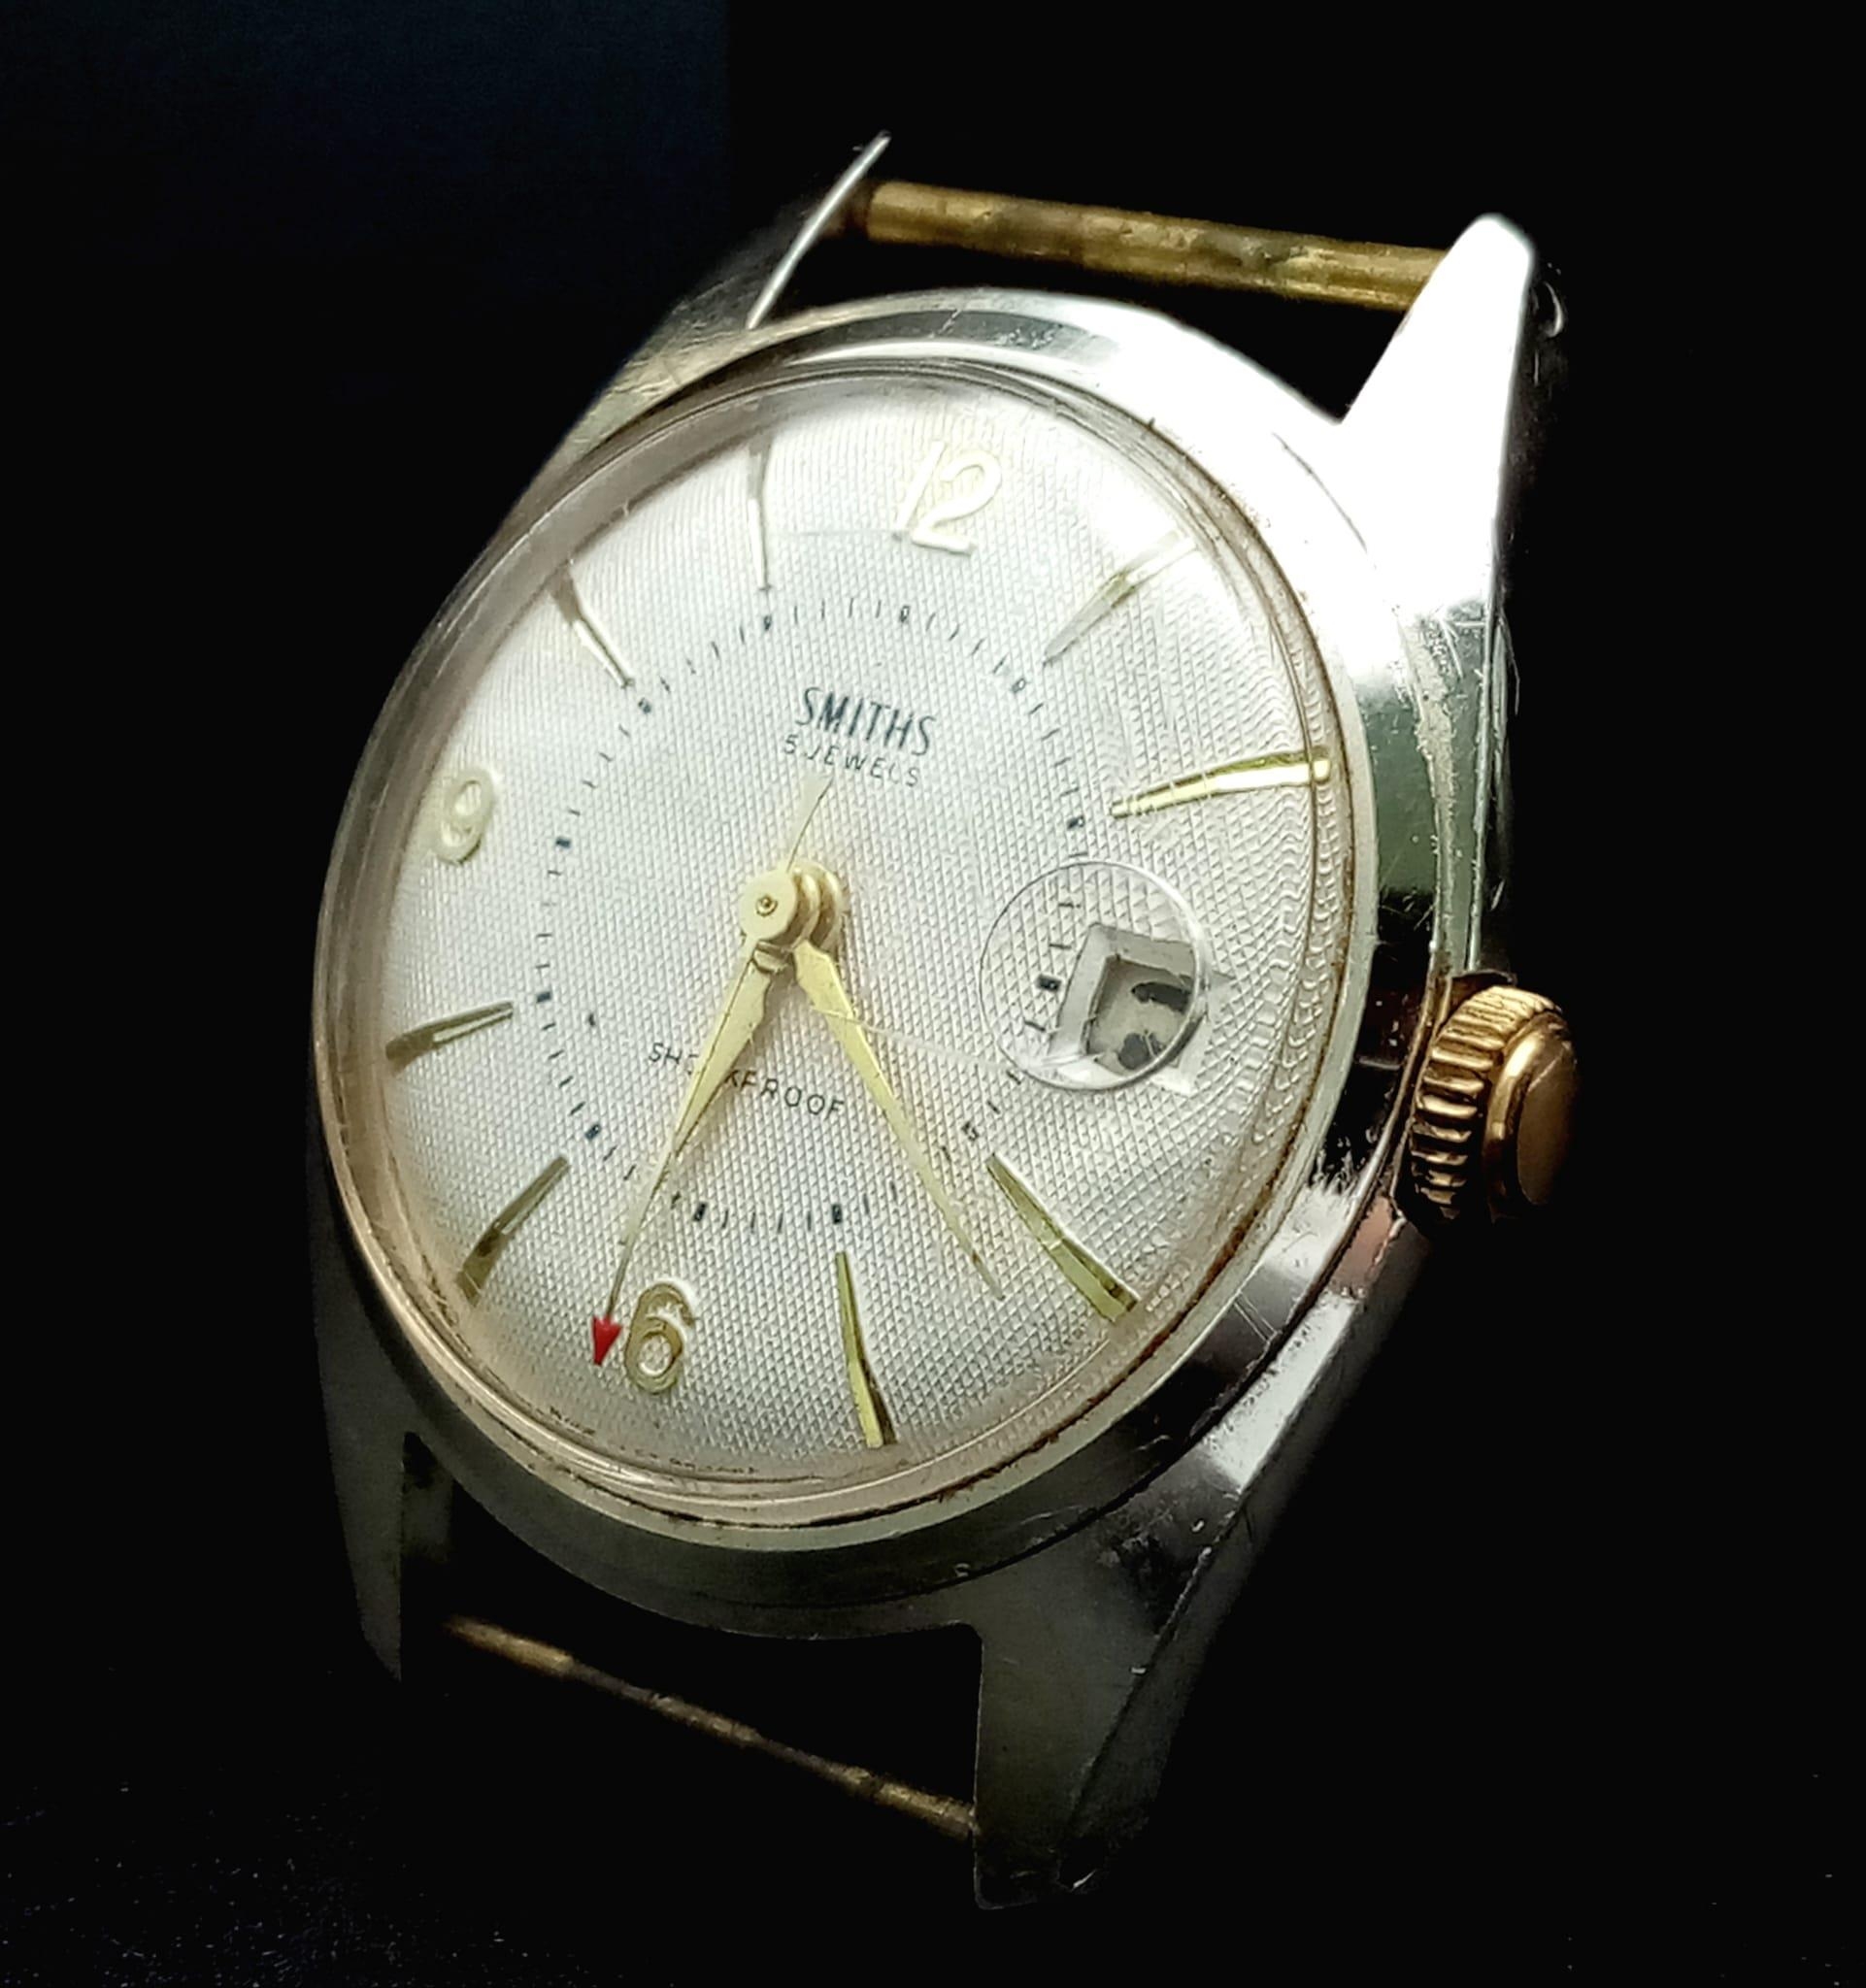 A Vintage Smiths 5 Jewels Watch Case - 34mm. White dial with date window. Mechanical movement in - Image 2 of 4